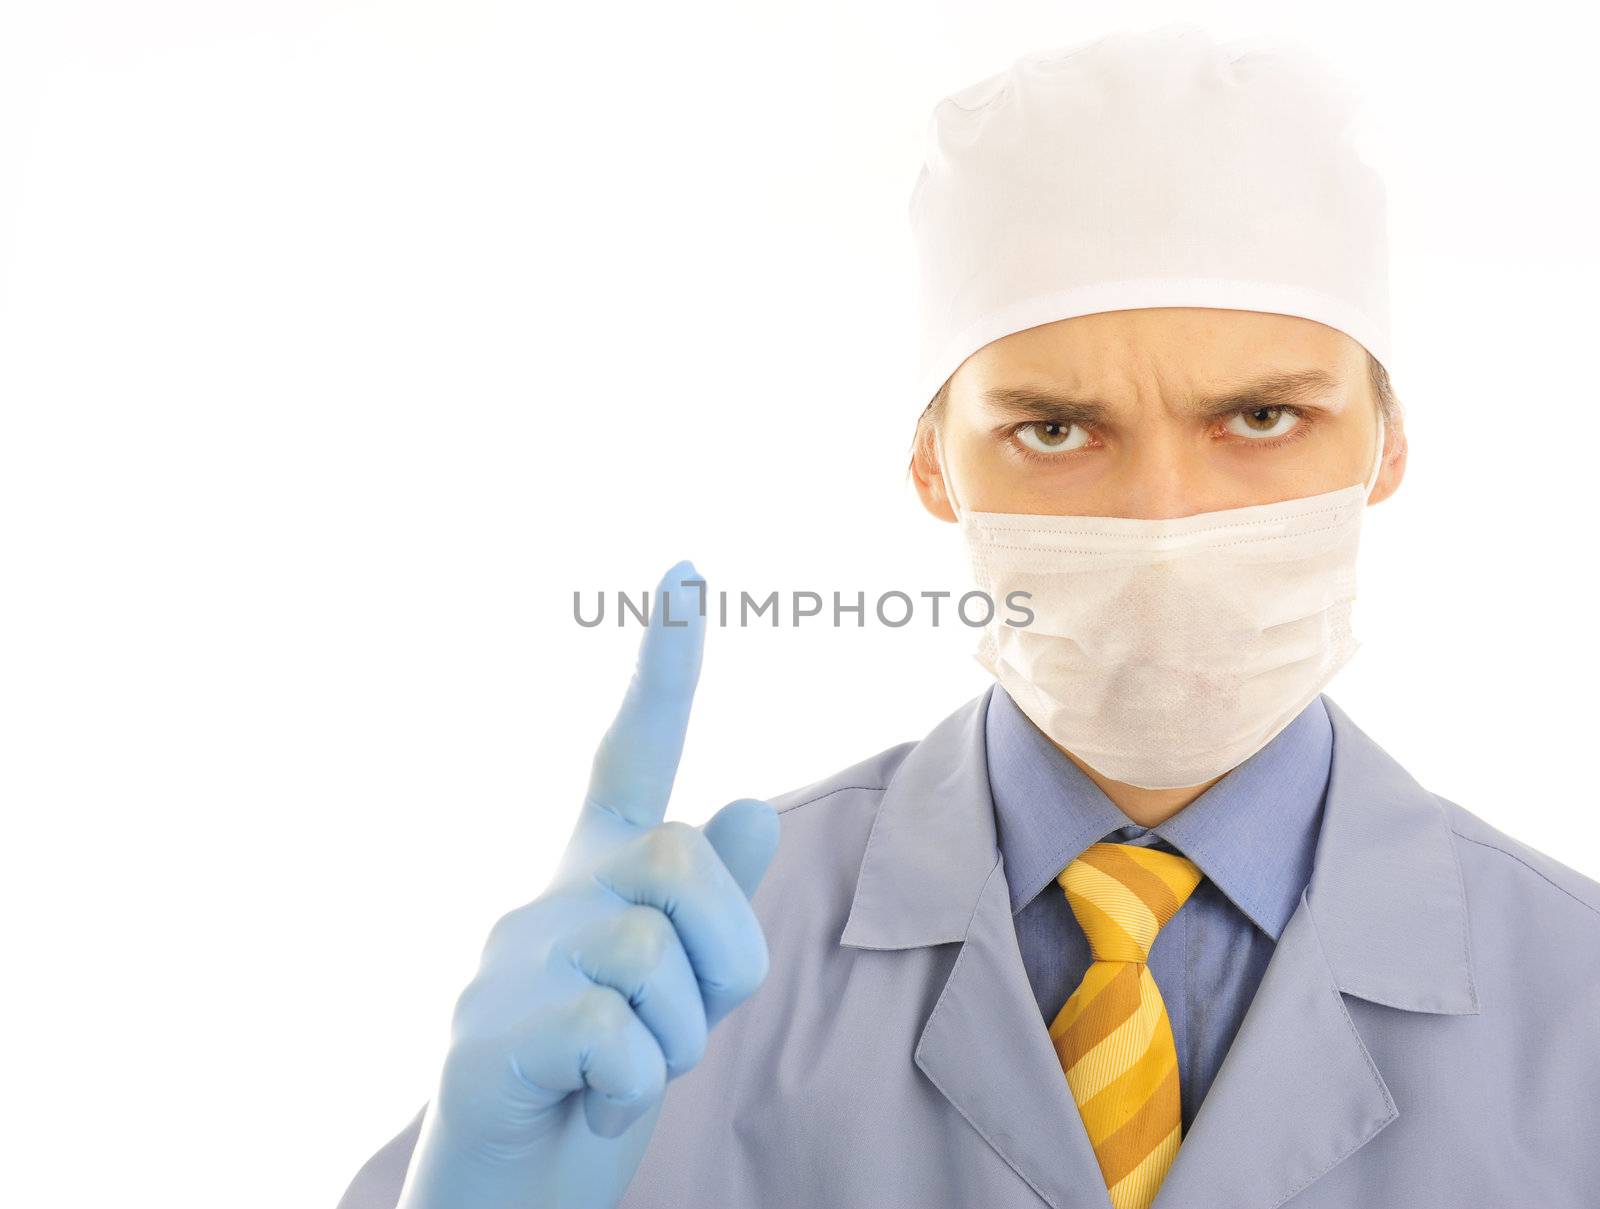  young doctor warning isolated on white